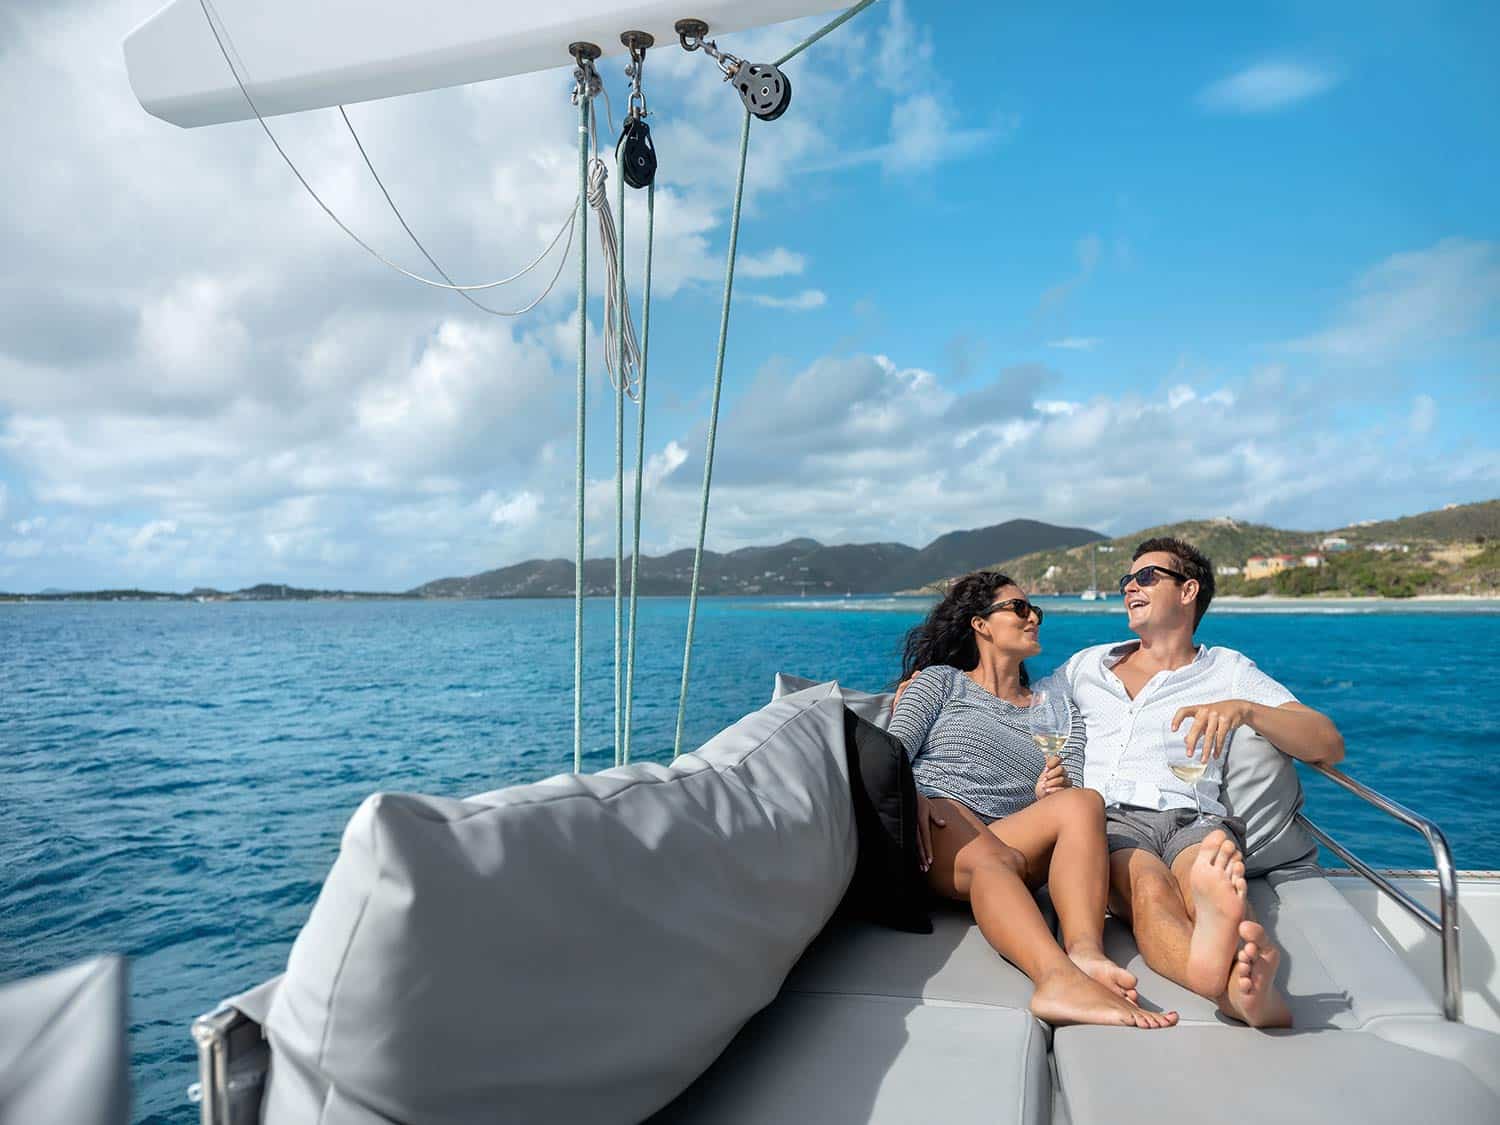 A man and woman lounge on the seats of a catamaran at sea.